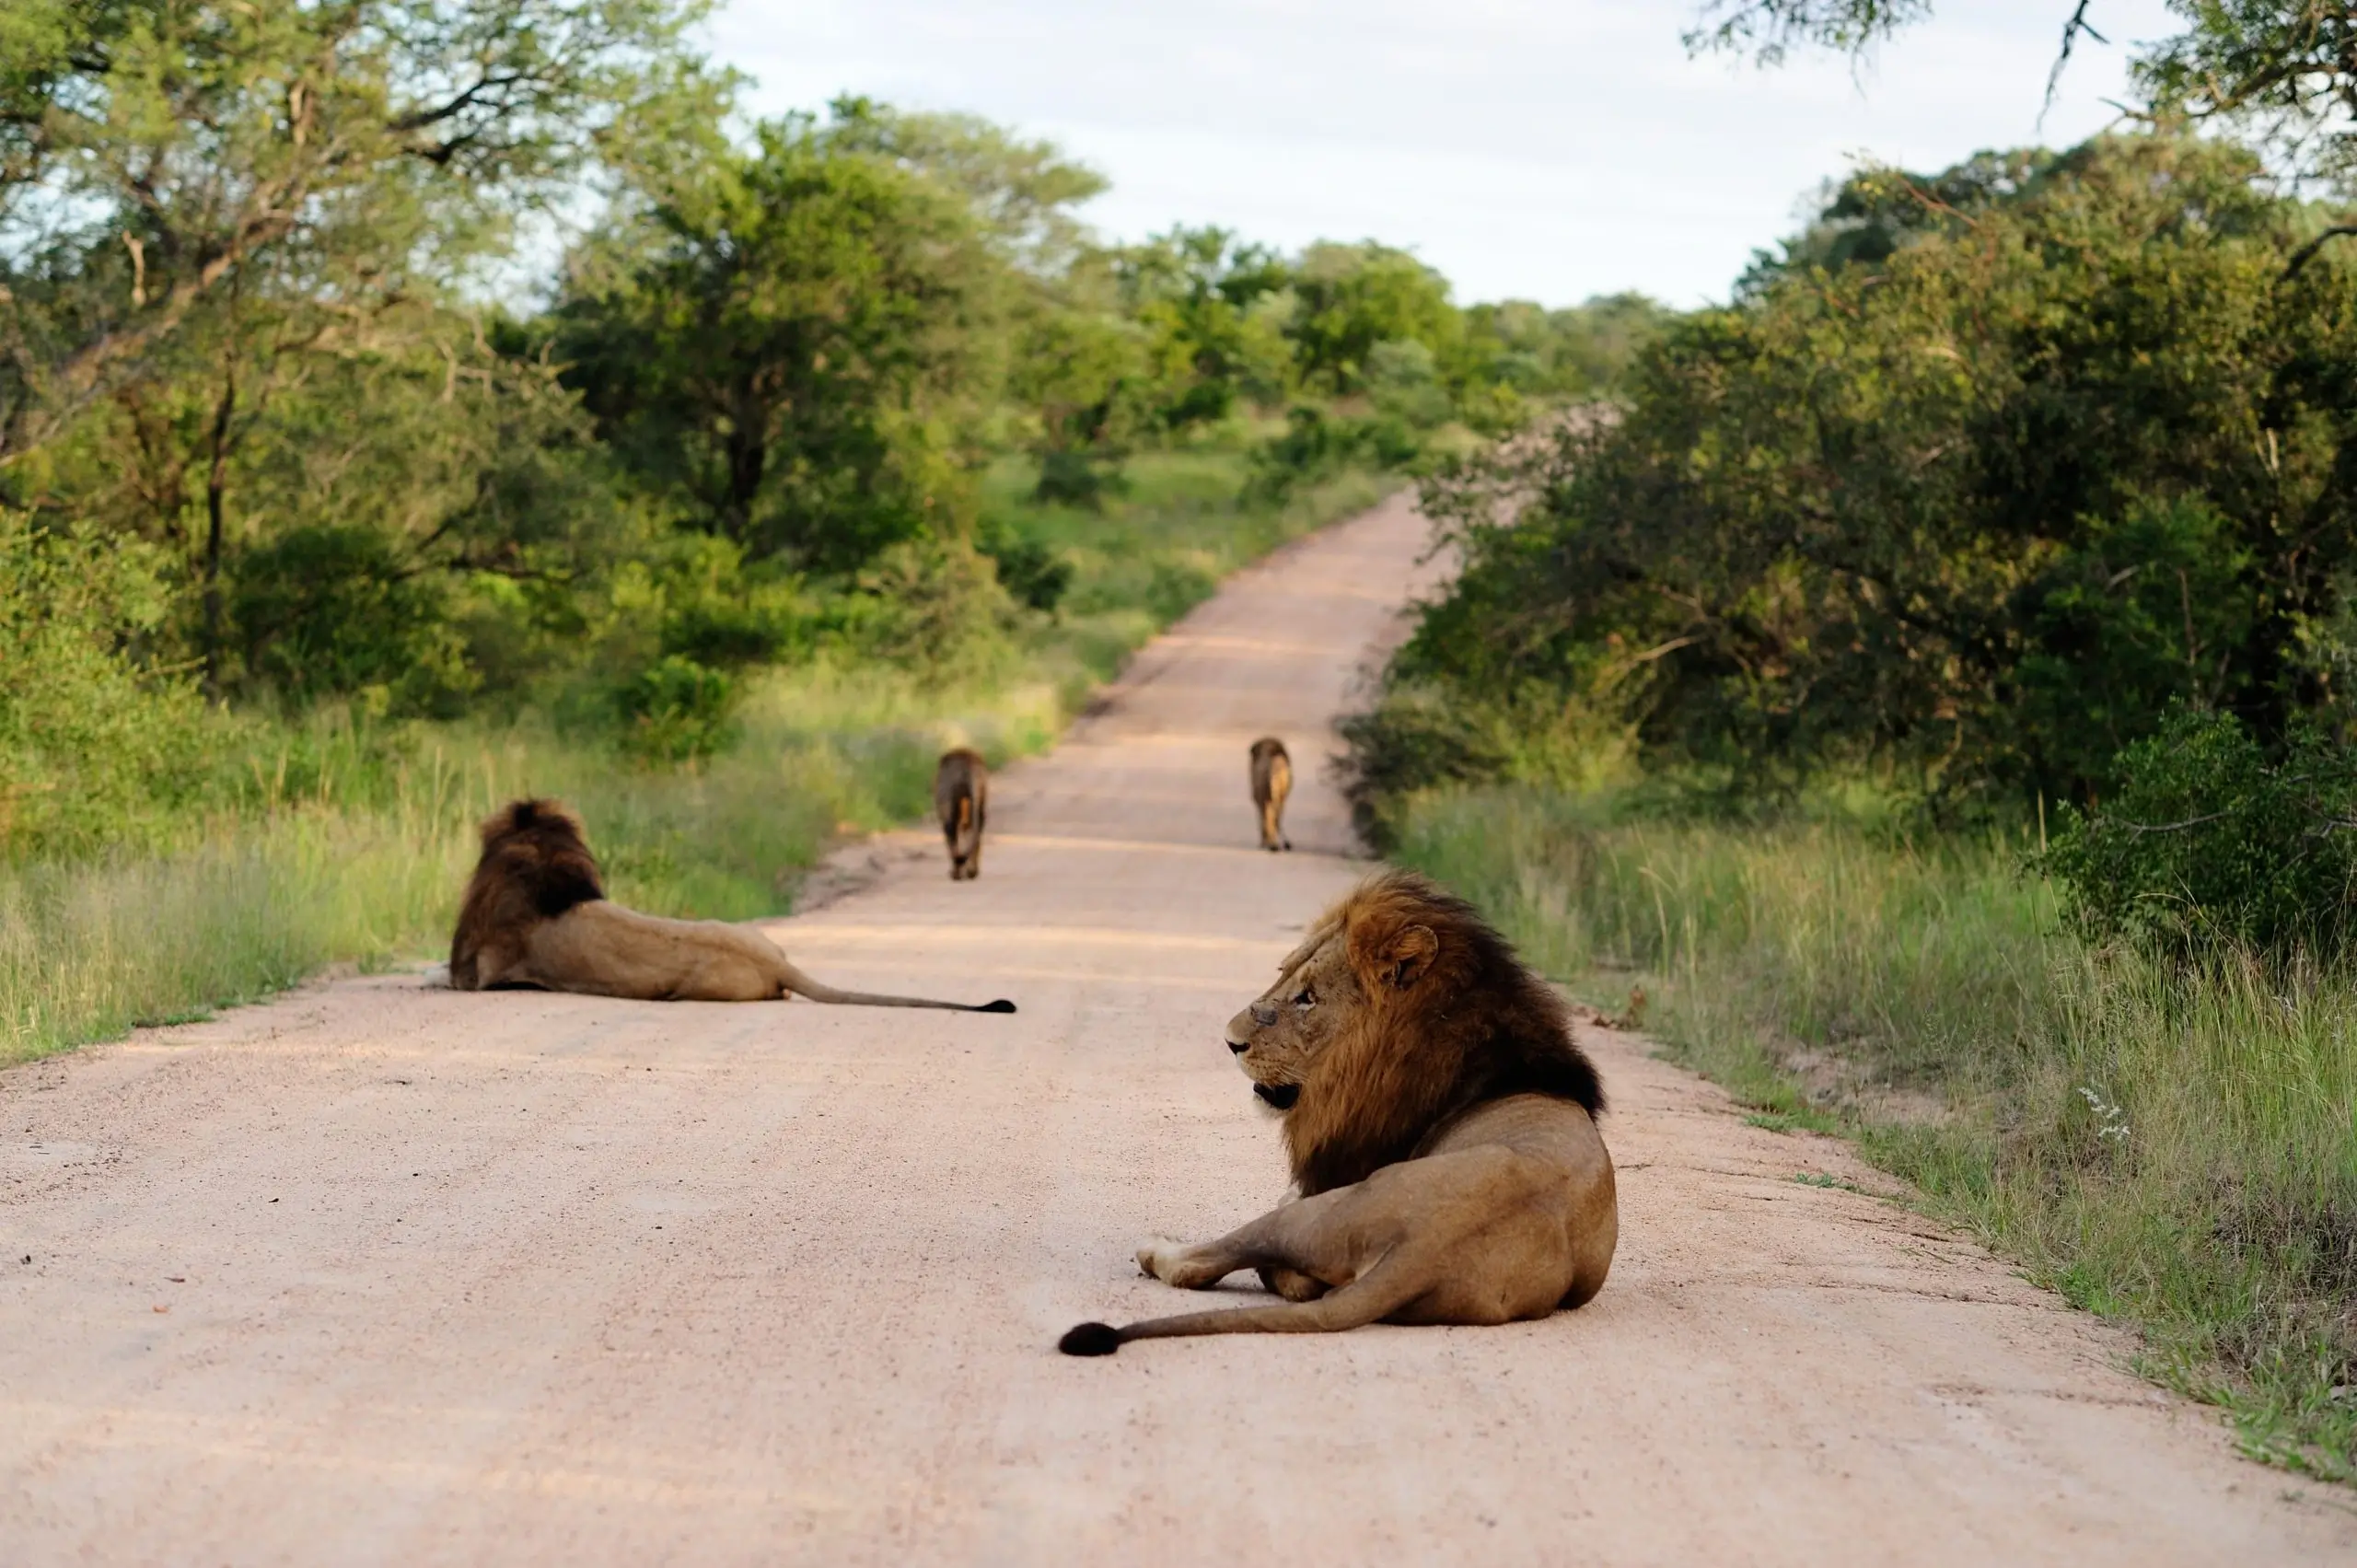 Group of magnificent lions gravel on road, surrounded by grassy fields trees